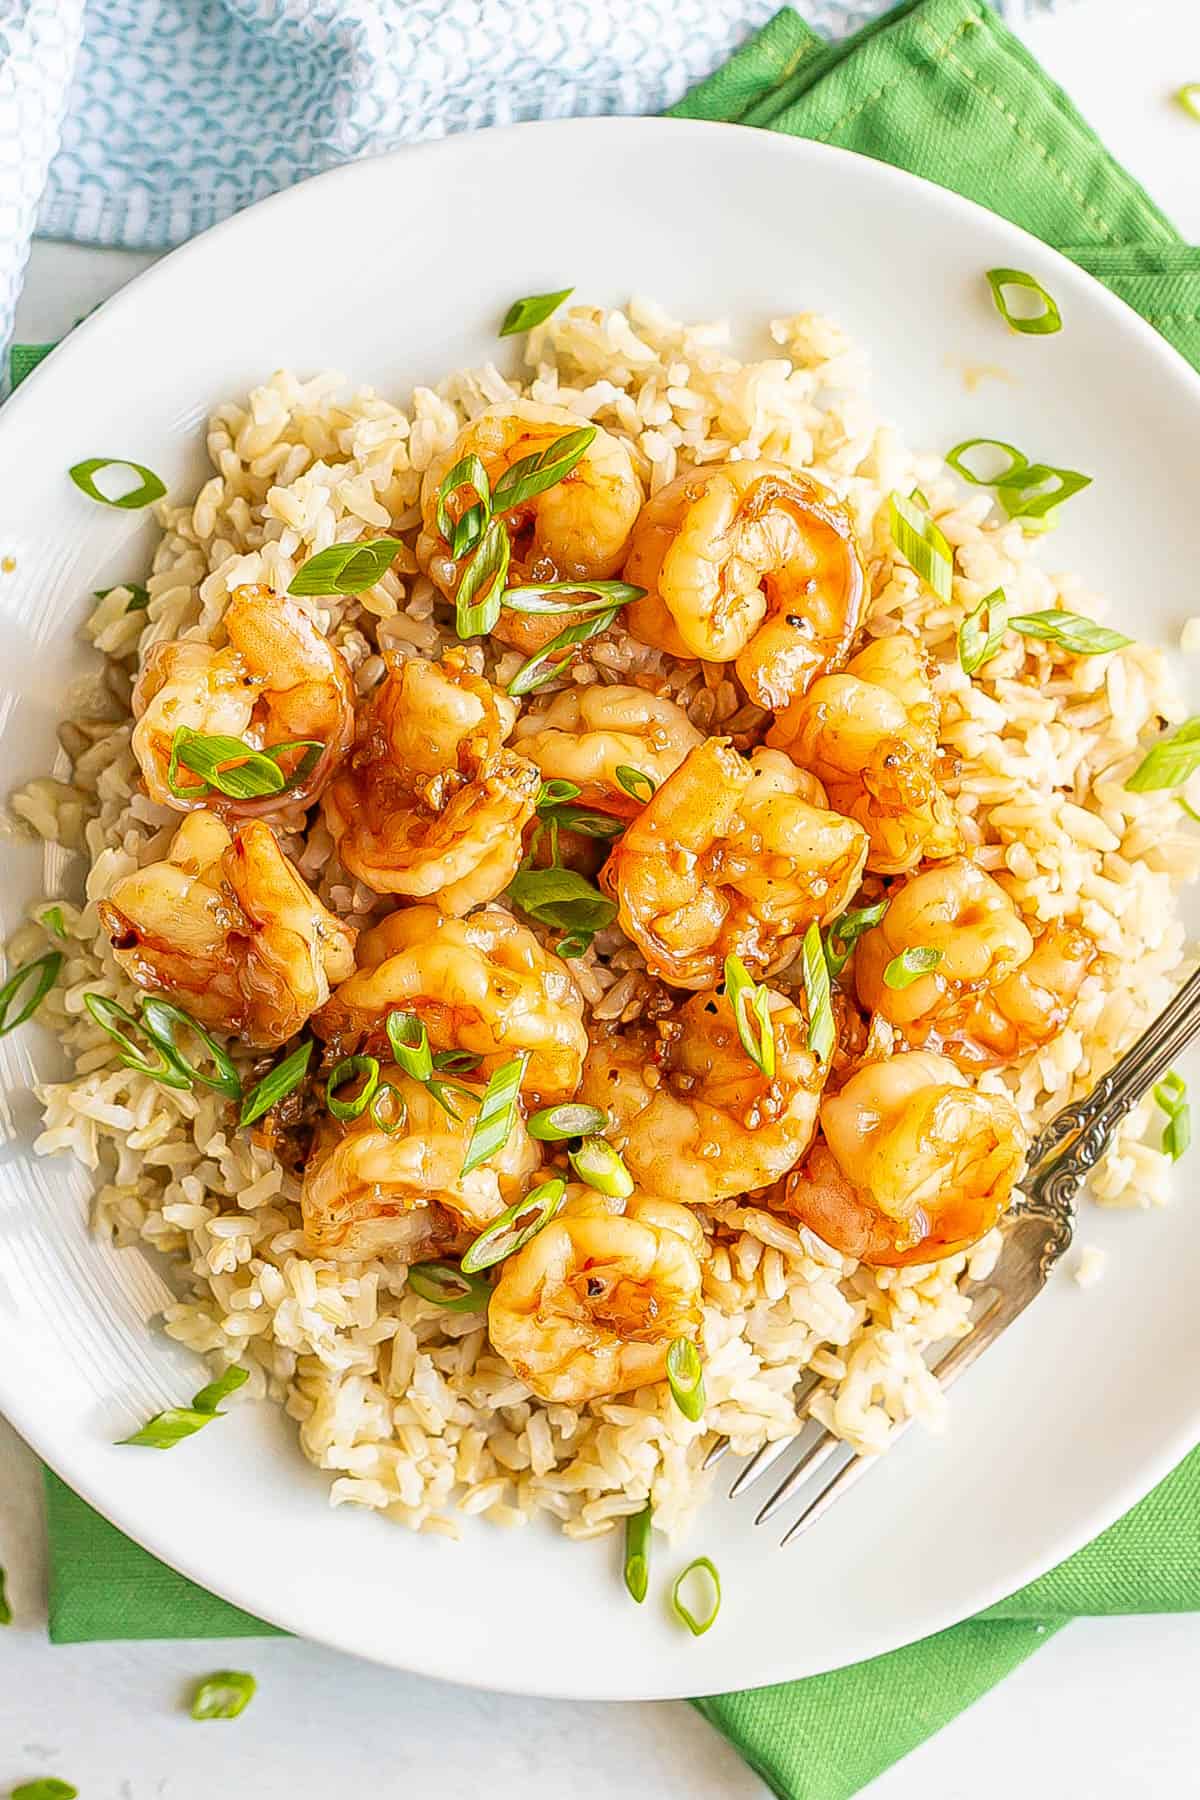 Honey garlic shrimp served on top of steamed brown rice on a white plate with sliced green onions sprinkled on top.